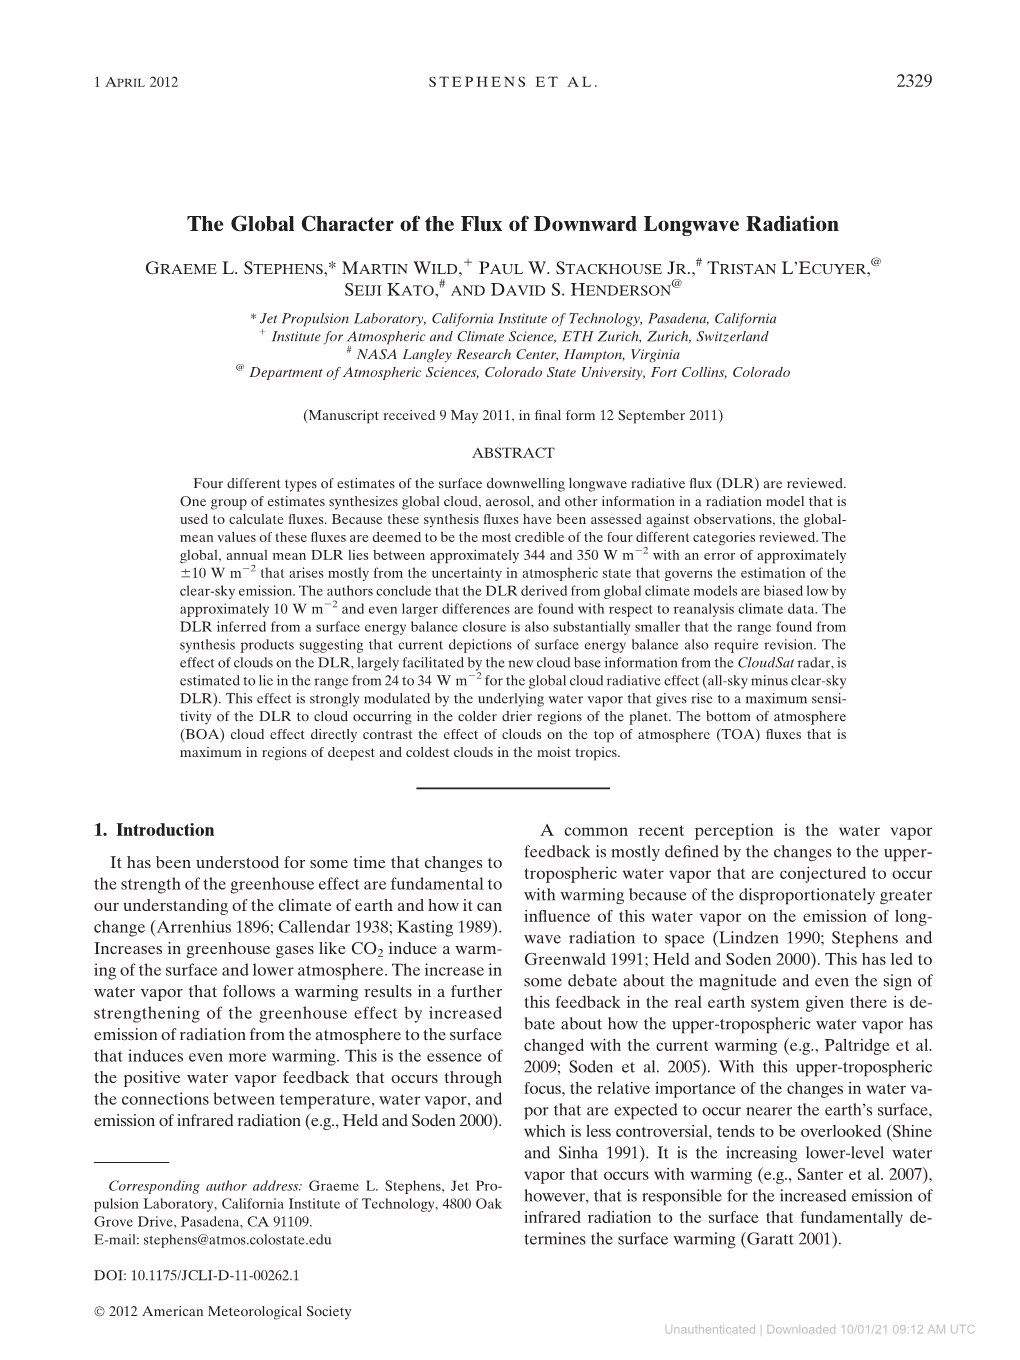 The Global Character of the Flux of Downward Longwave Radiation